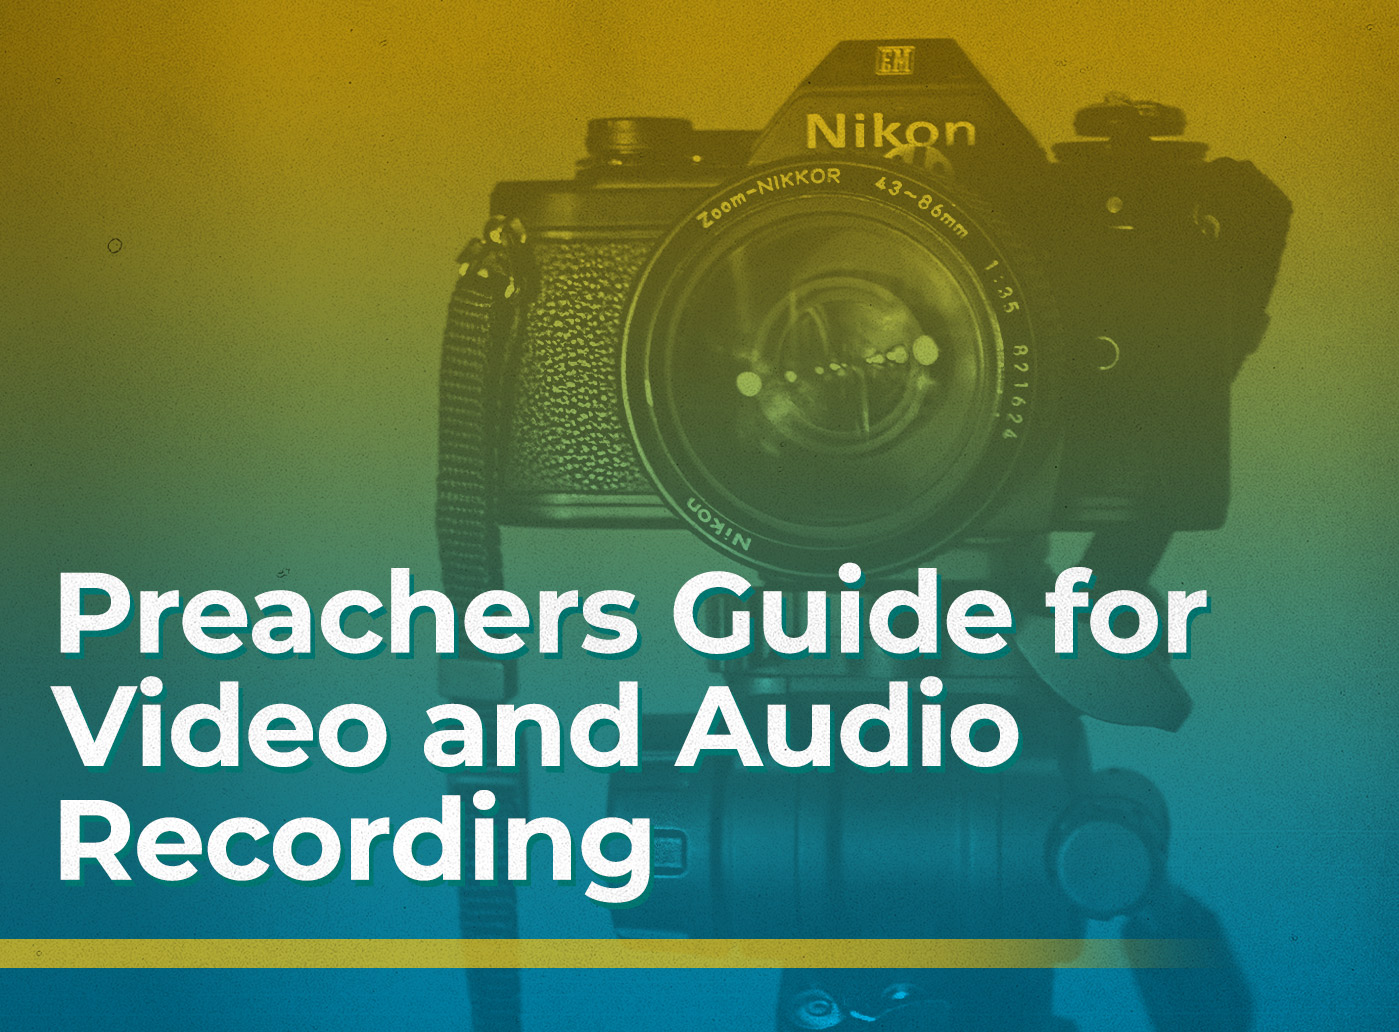 Preacher's Guide for Video and Audio Recording